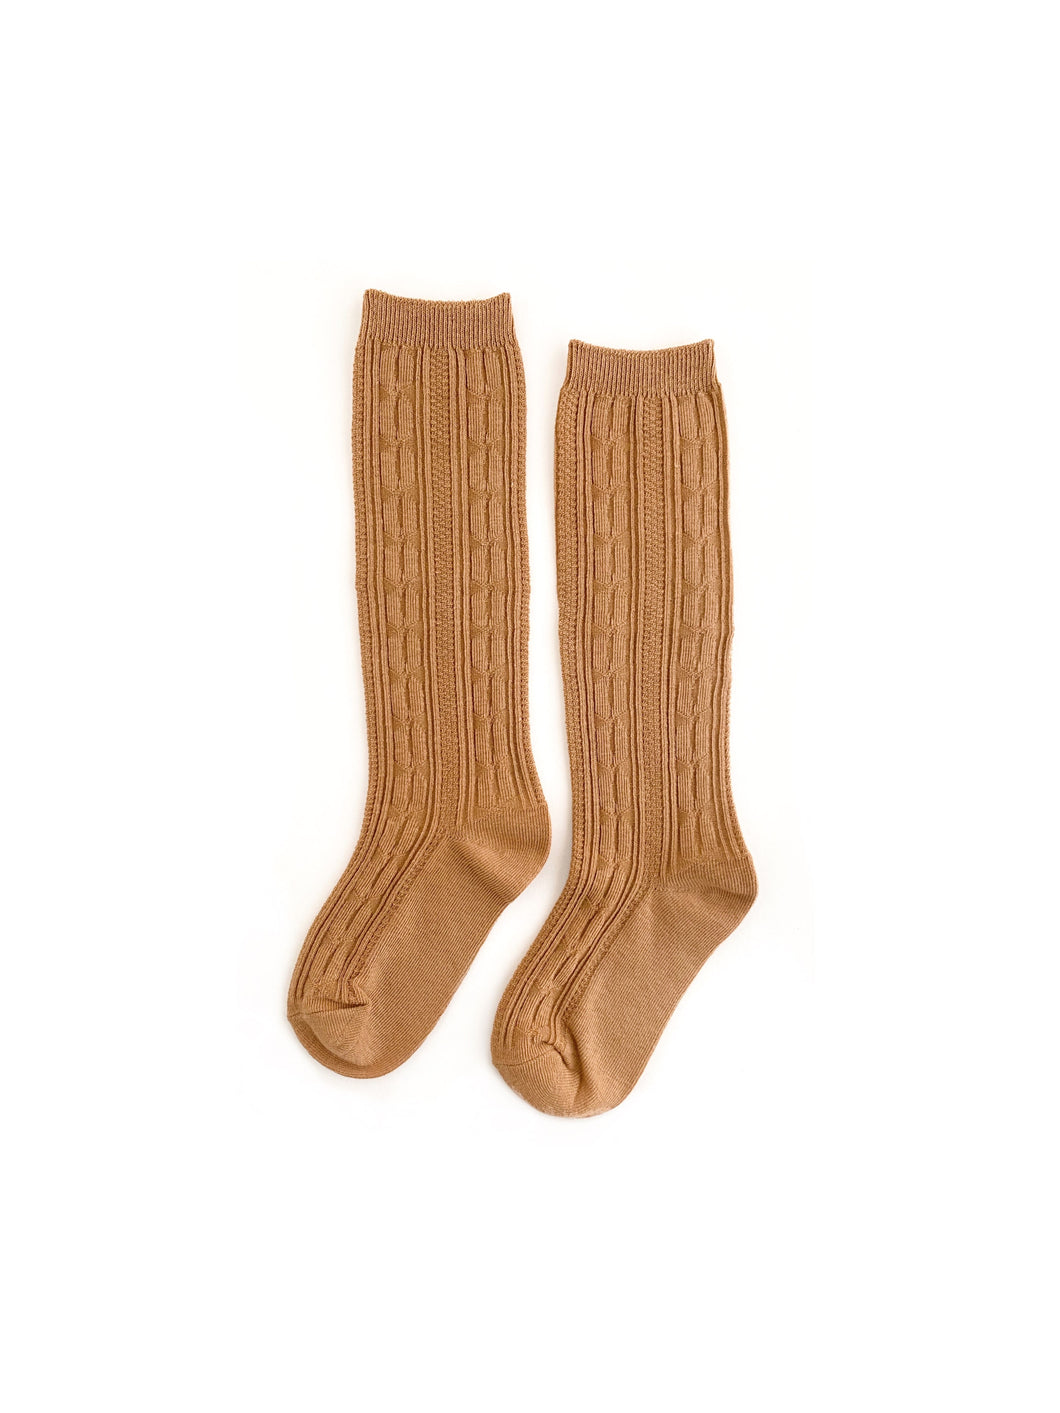 Little Stocking Co. Butterscotch Cable Knit Knee Highs